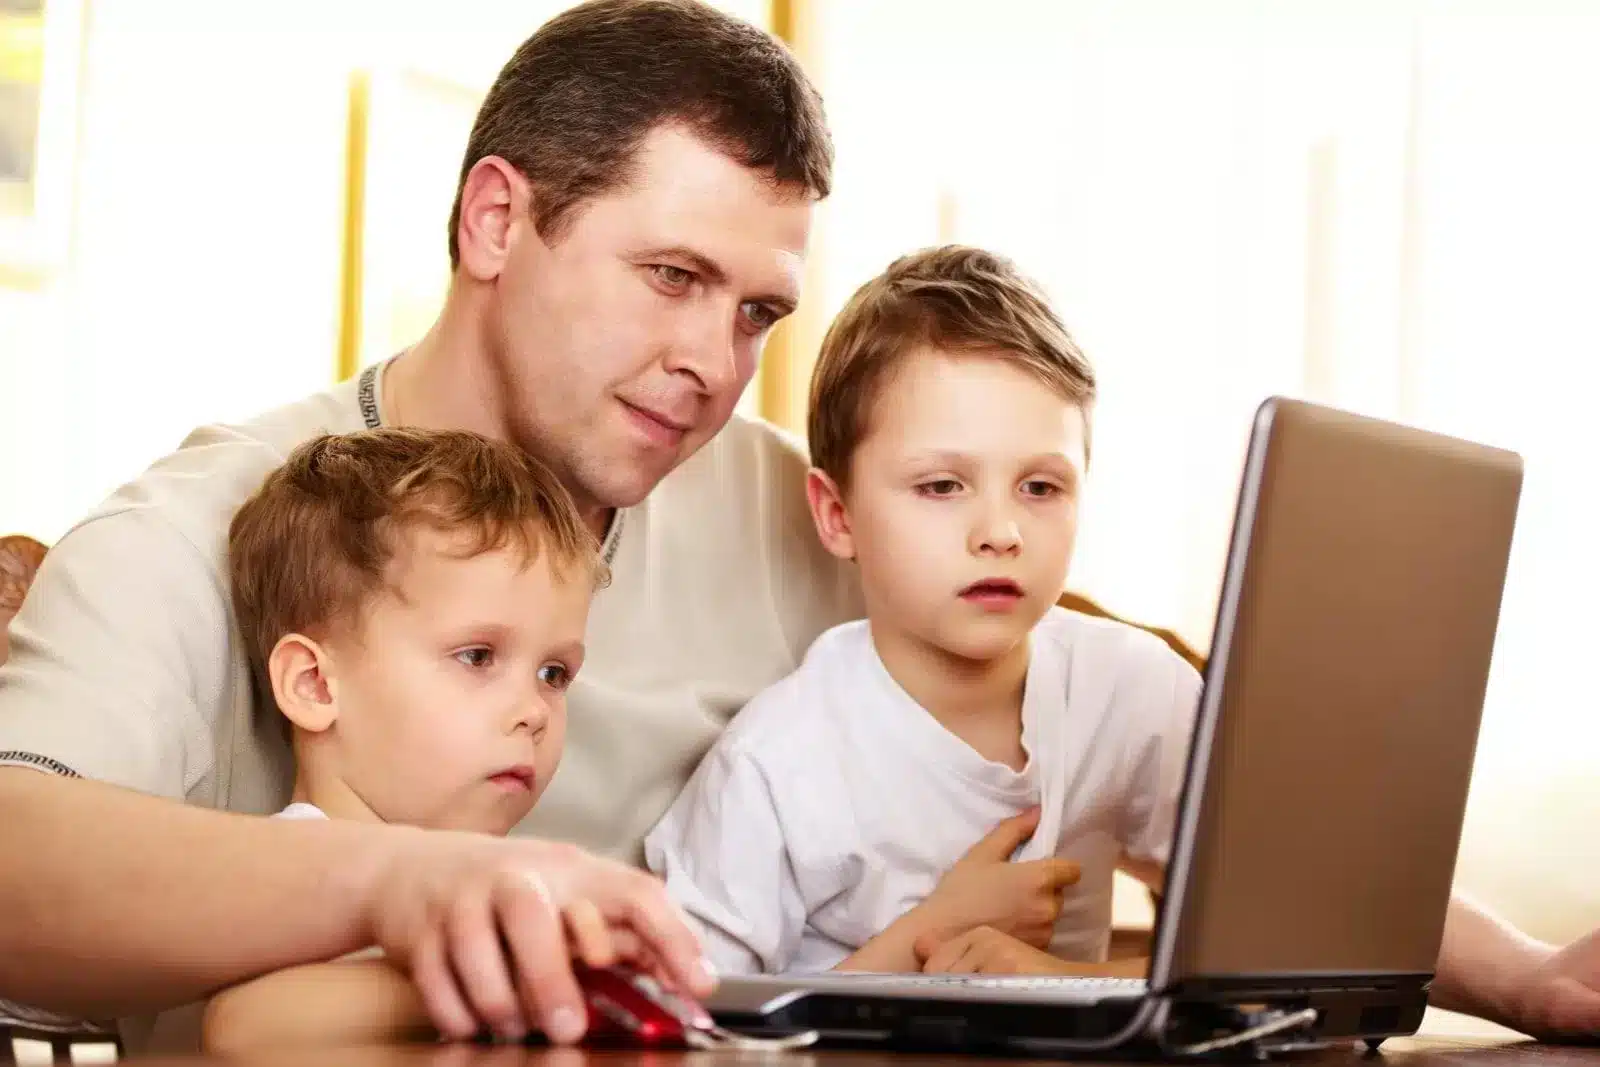 A Father teaching his two sons how to operate a laptop